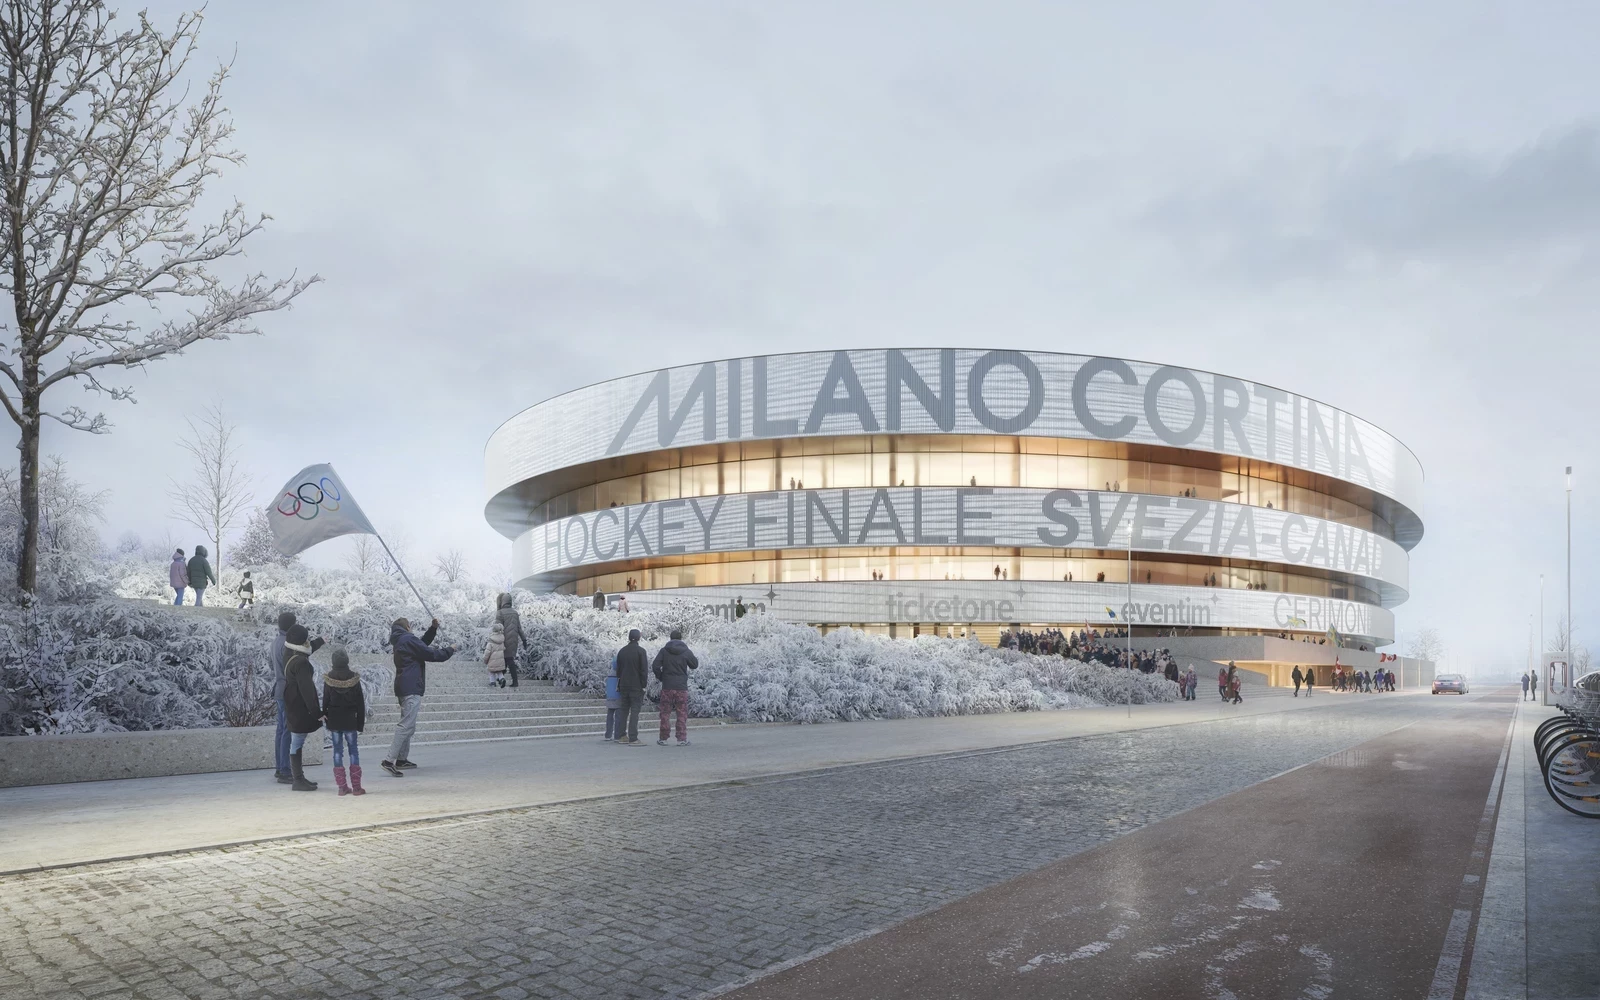 Italian civil engineering company Trevi have been appointed to carry out piling works on Milan Cortina 2026 venue Arena Santa Giulia ©David Chipperfield Architects 